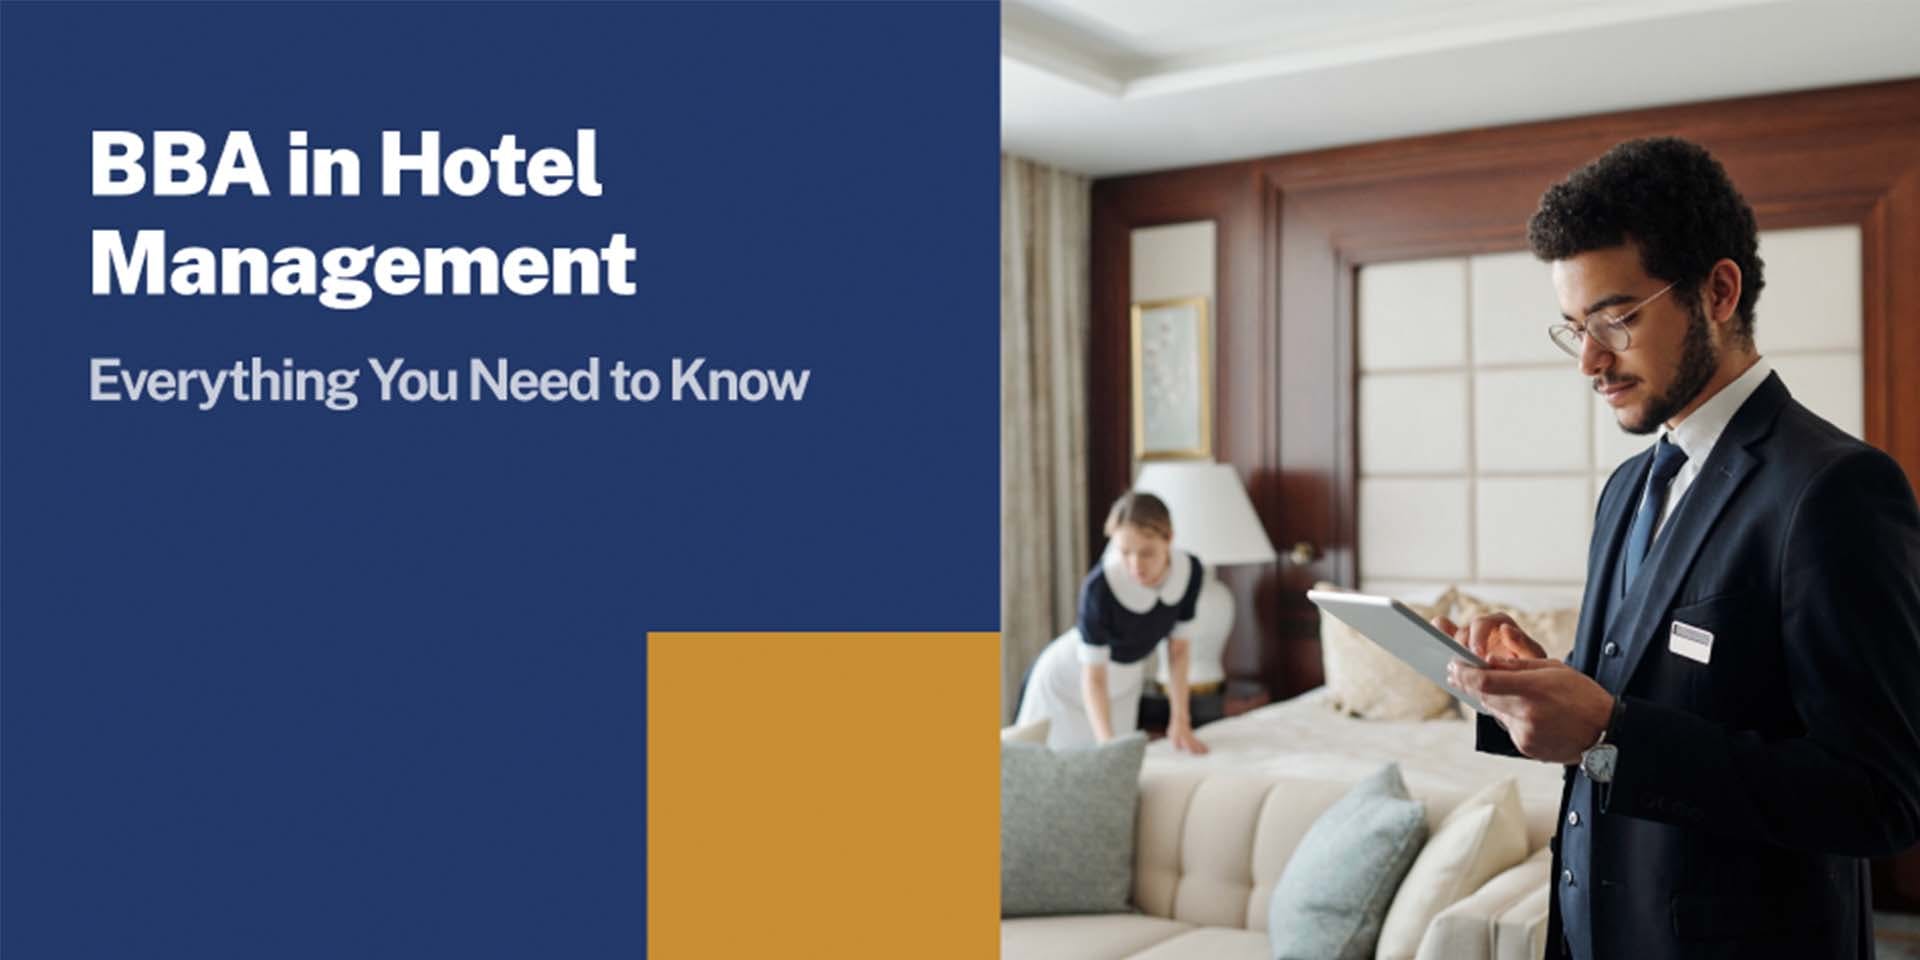 BBA in Hotel Management: Everything You Need to Know